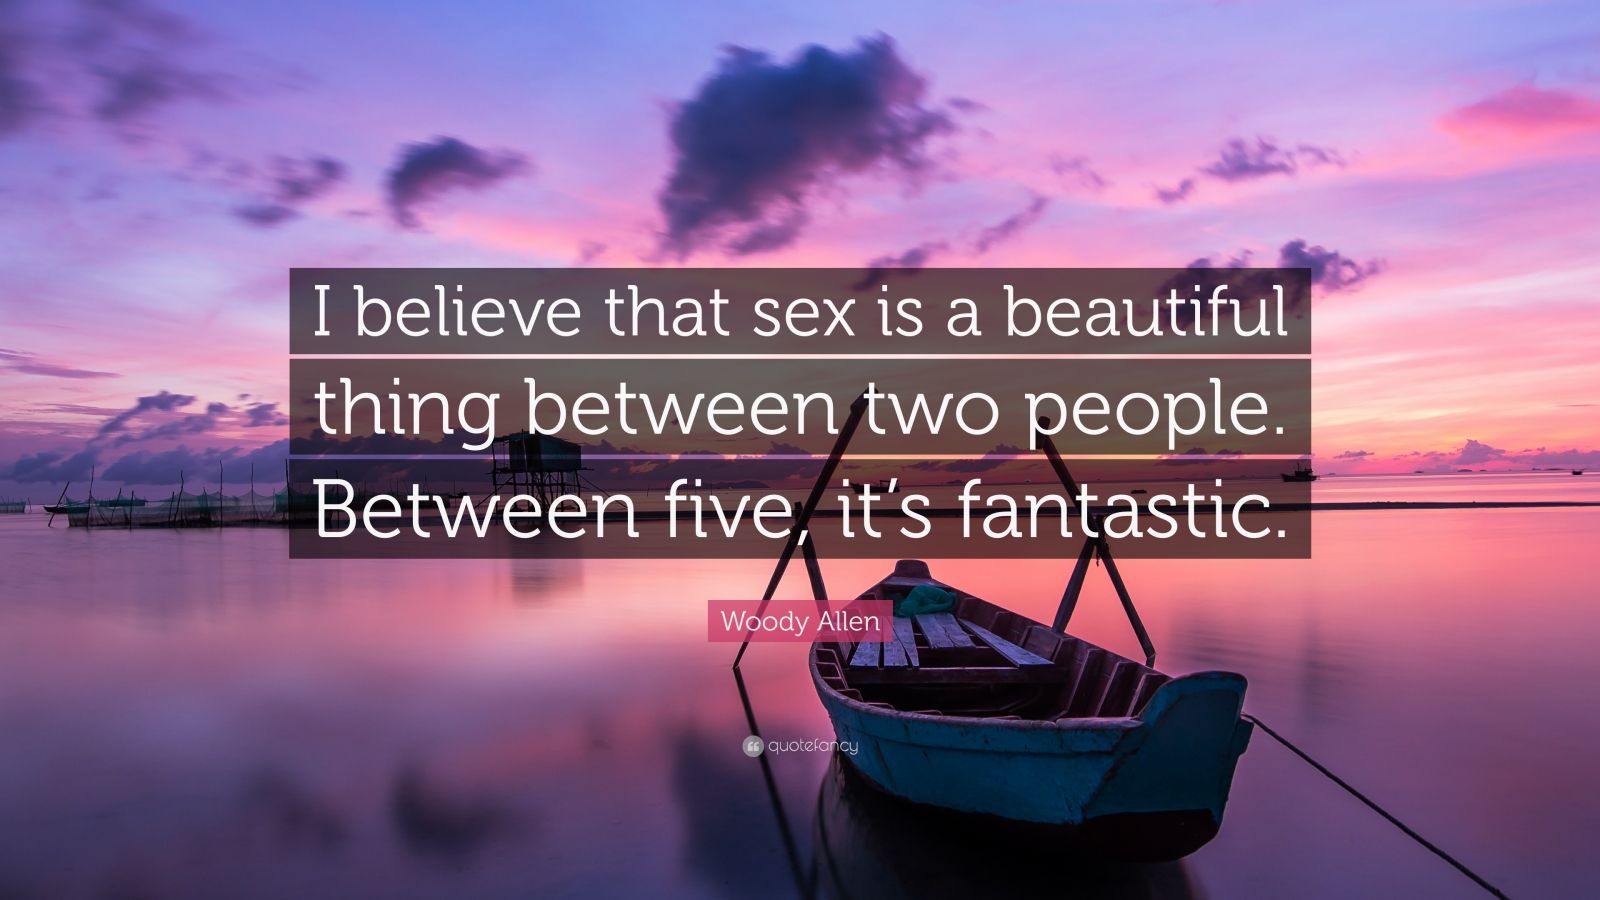 Woody Allen Quote “i Believe That Sex Is A Beautiful Thing Between Two